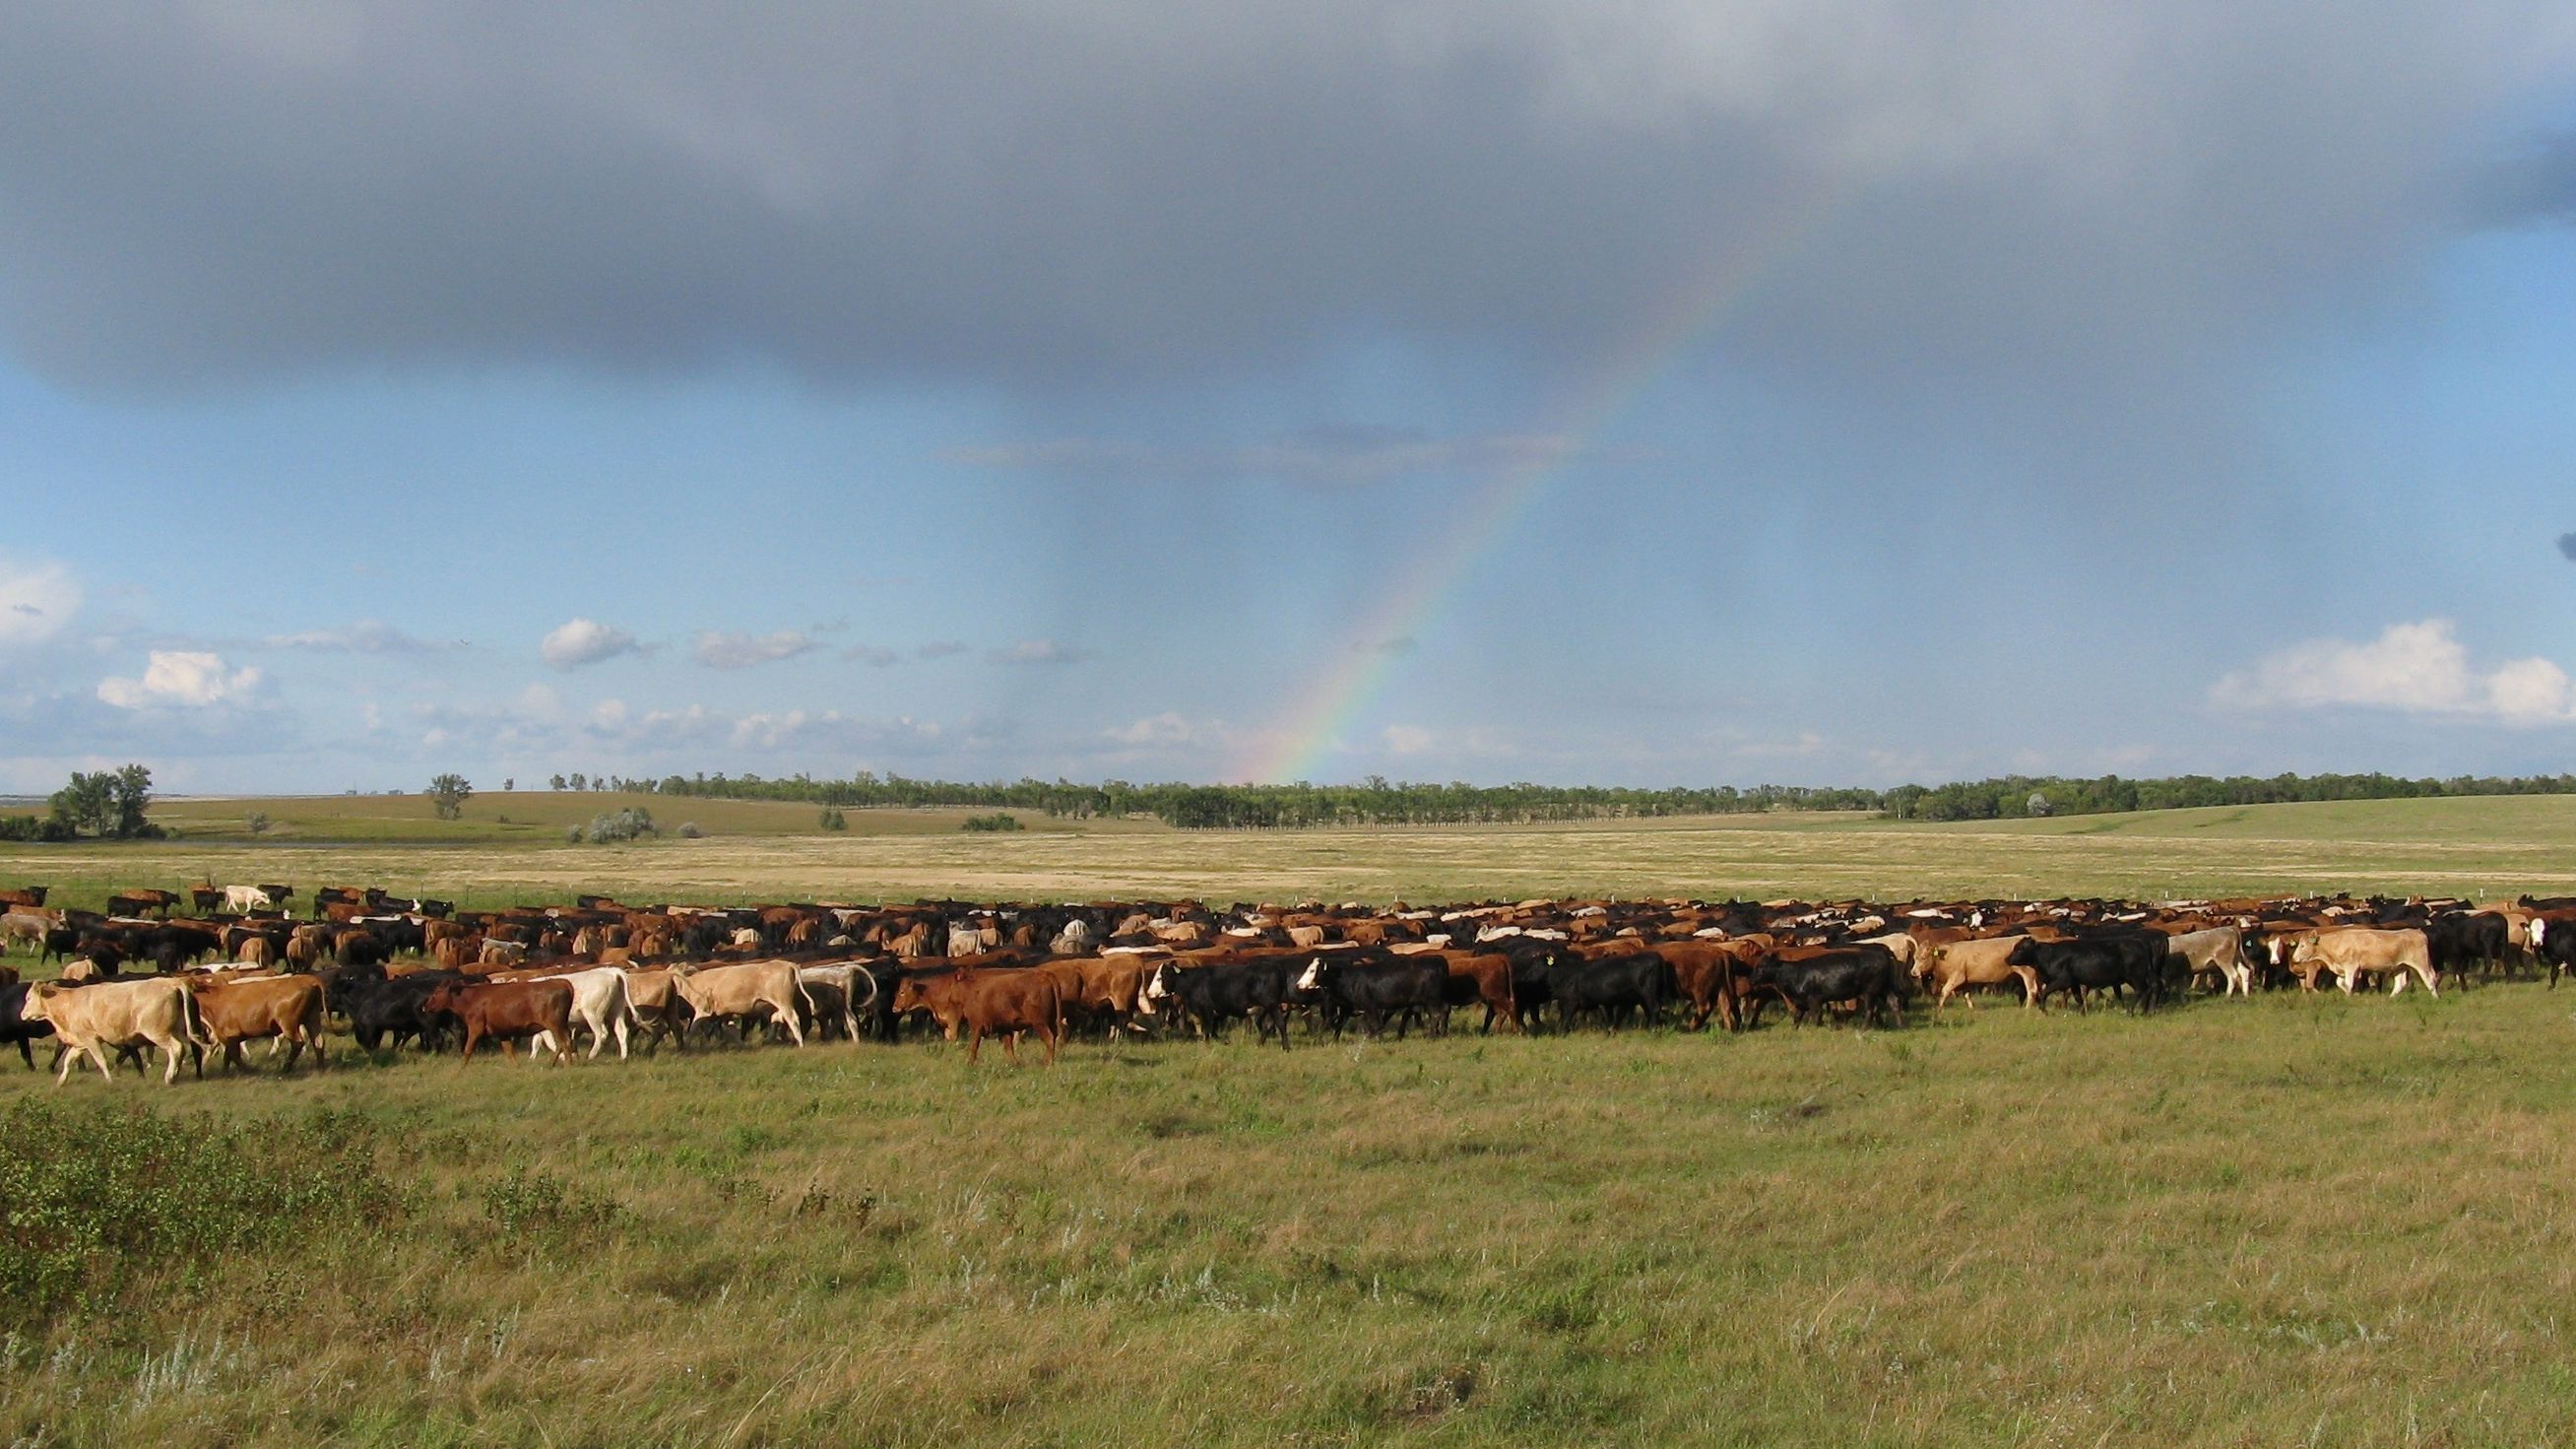 Cattle in Pasture with Rainbow